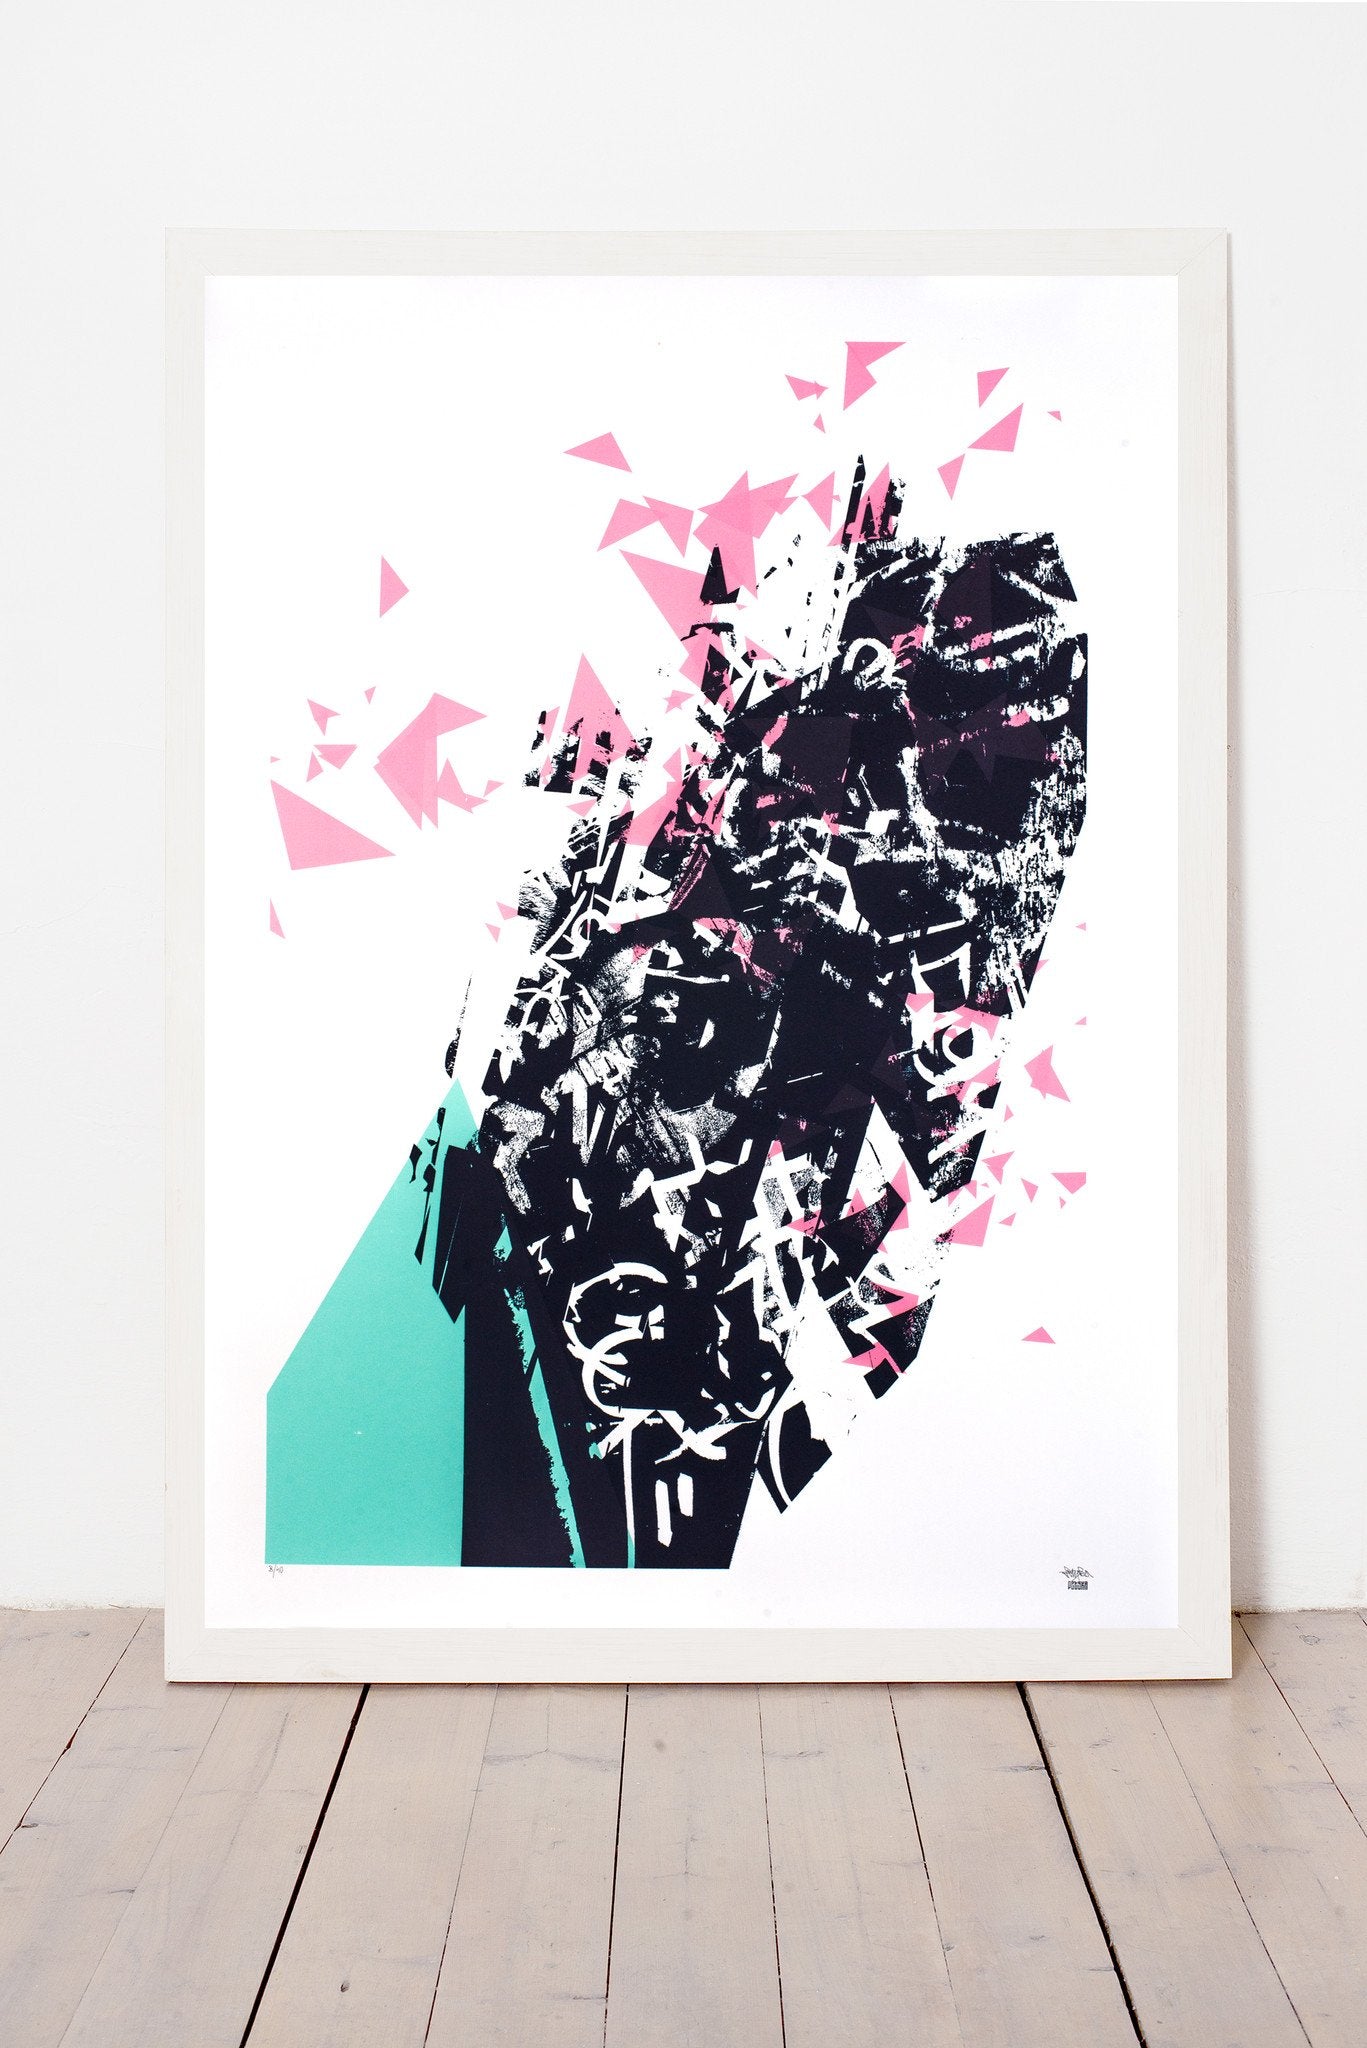 SOMNIUM LIMITED EDITION NUMBERED AND SIGNED GRAPHICS PRINTA HAND-MADE WATER-BASED SILKSCREEN PRINT ON RECYCLED PAPER